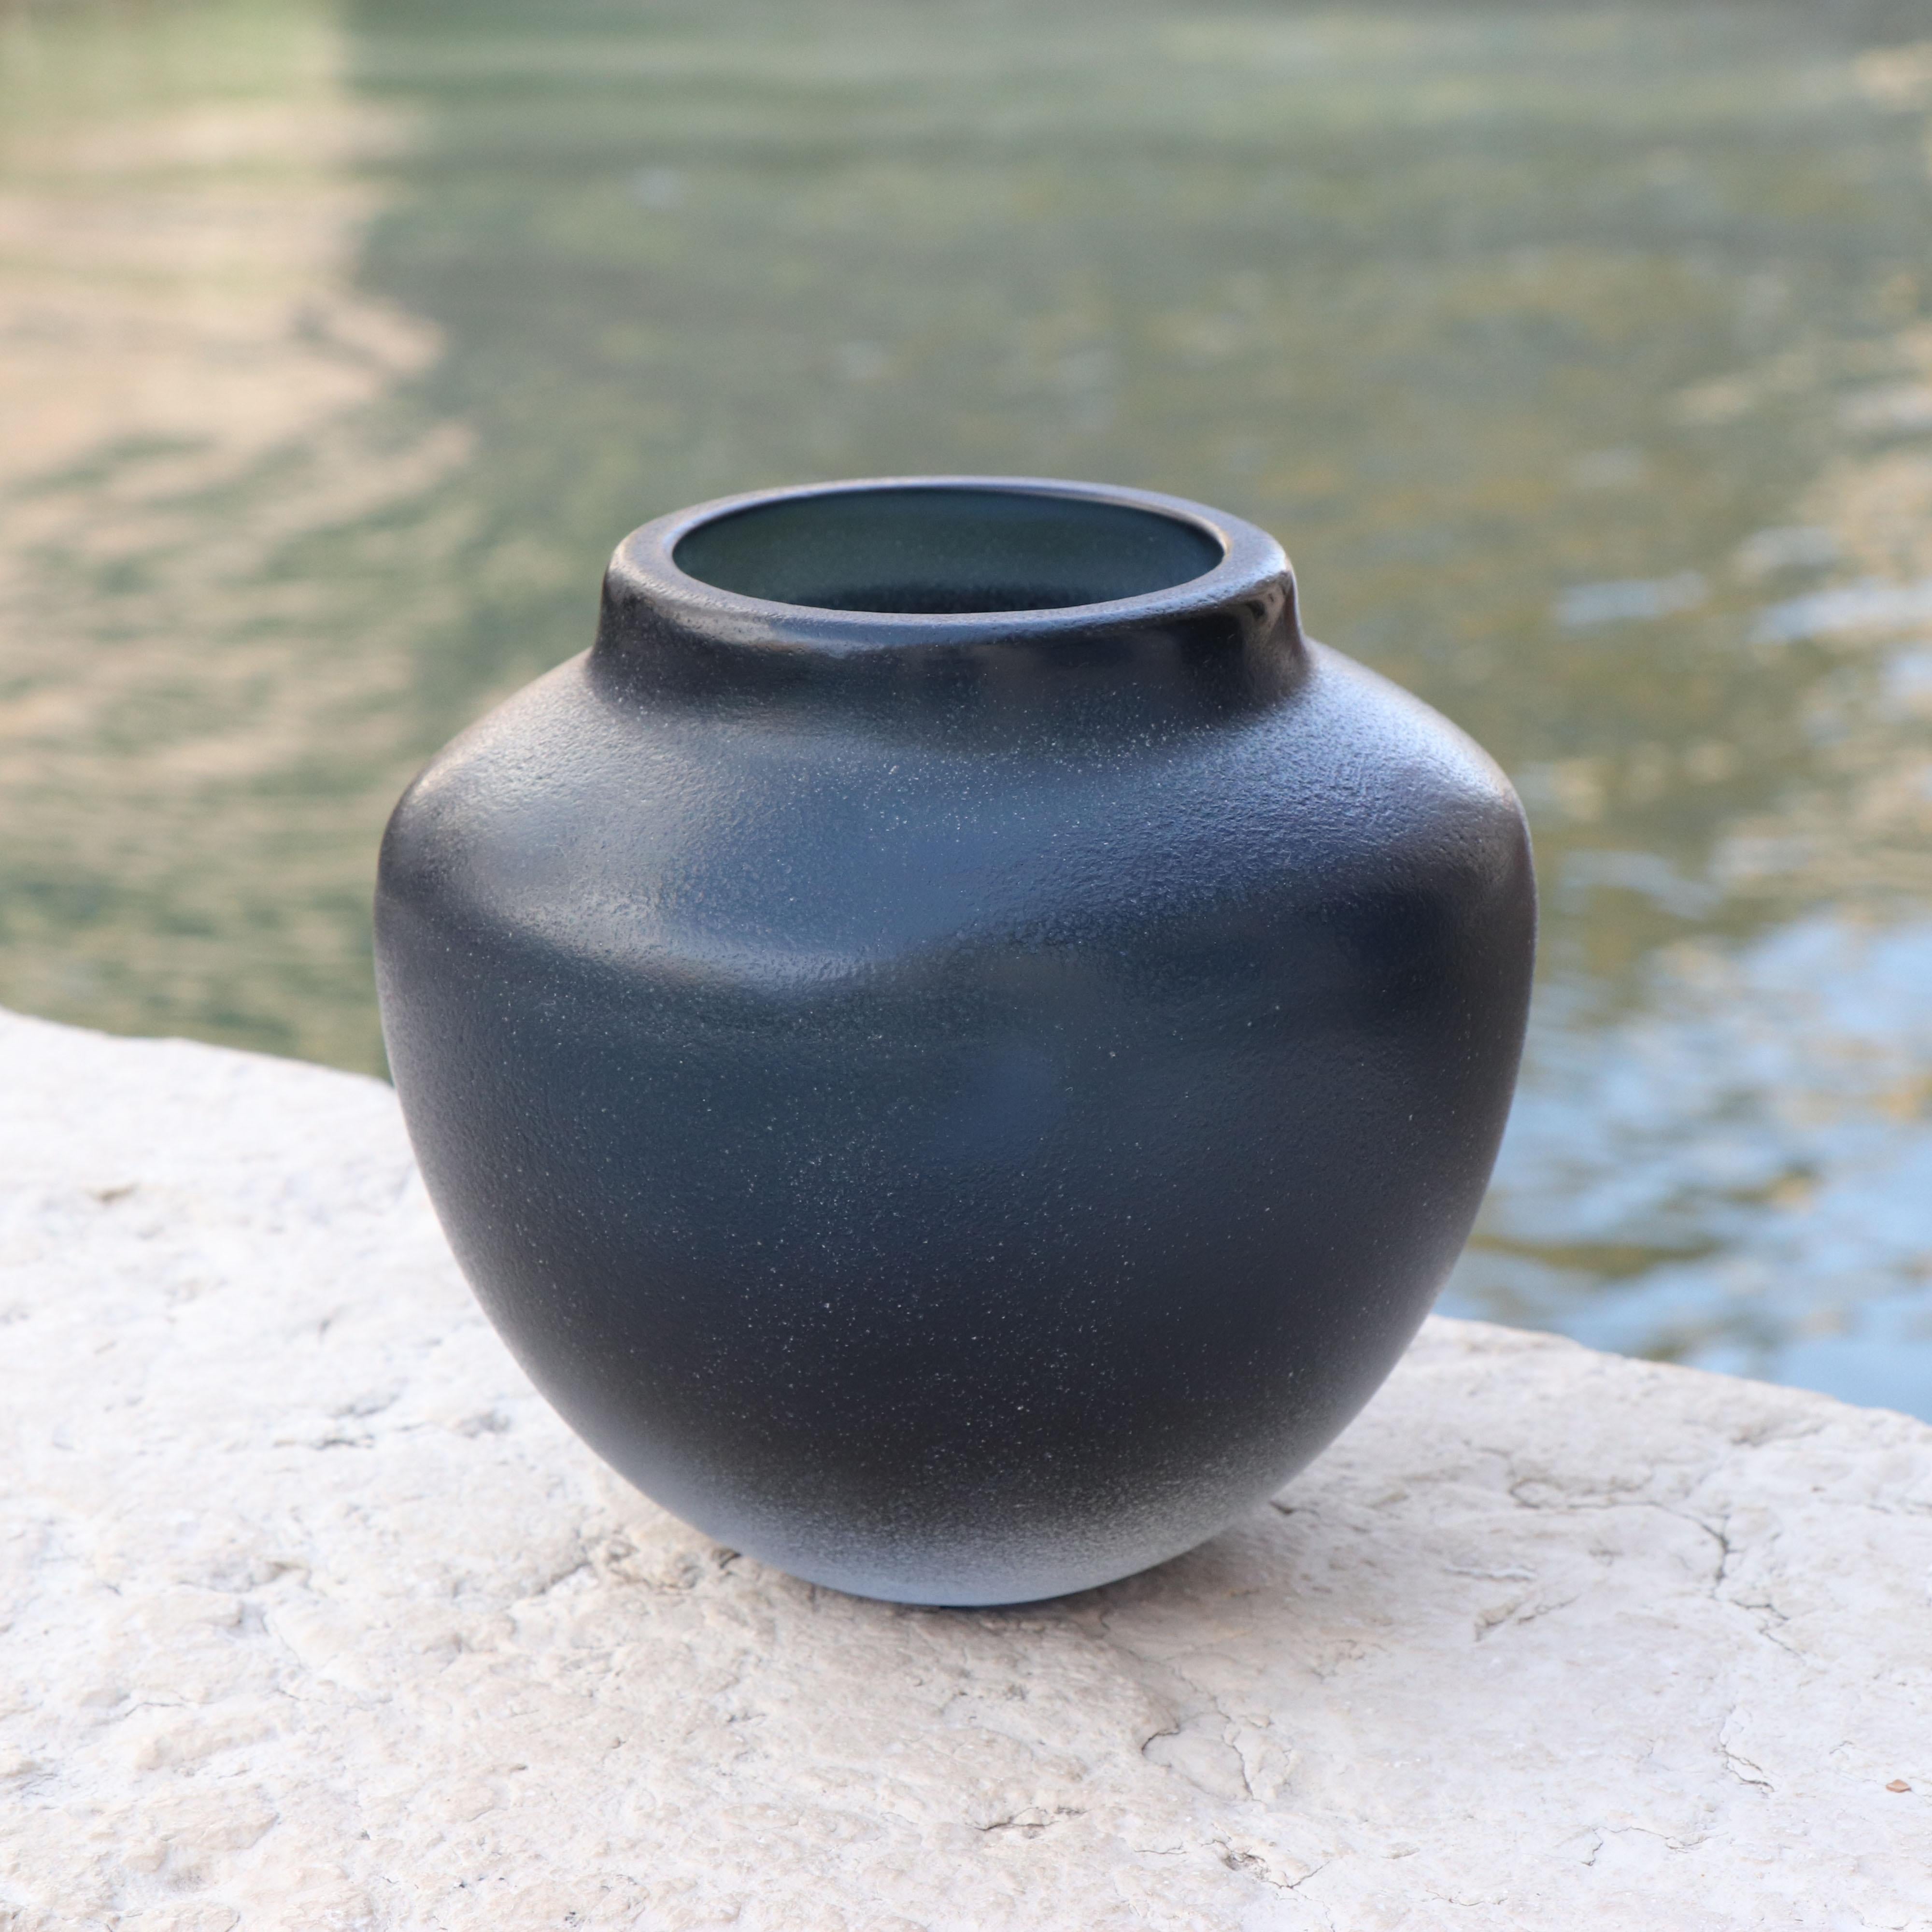 Inspired by the ancient amphorae, this vase resembles the elongated form of a drop – which in Italian translates as Goccia. Following the blowing process the vase is engraved and polished producing a vibrant faceted surface.

This vase is